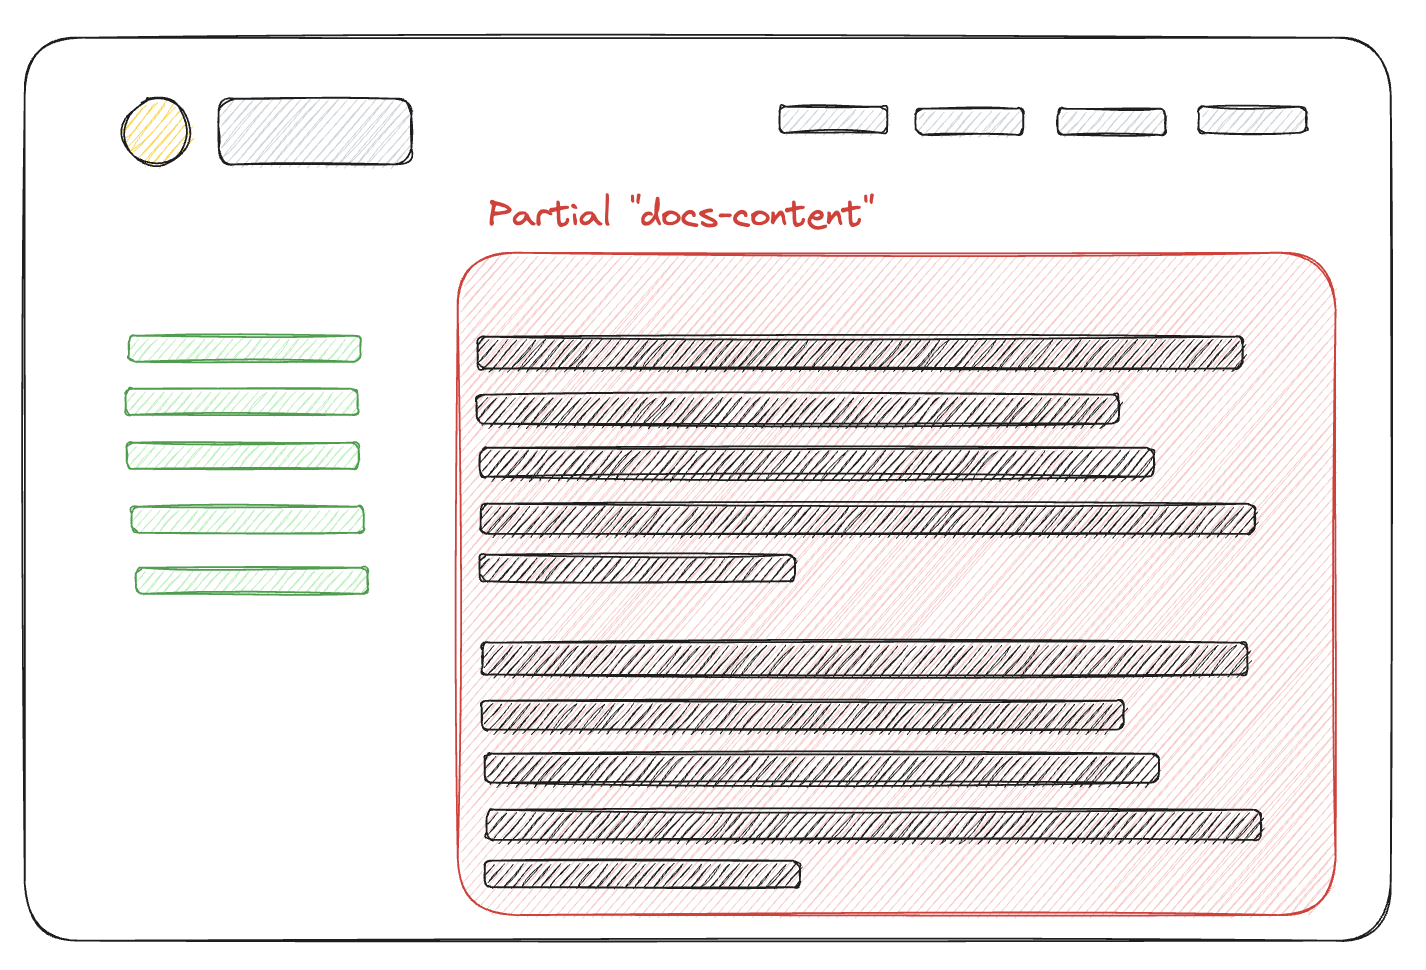 A sketched layout of a typical documentation page with the sidebar on the left composed of green links and a main content area on the right. The main content area is labeled as Partial "docs-content"